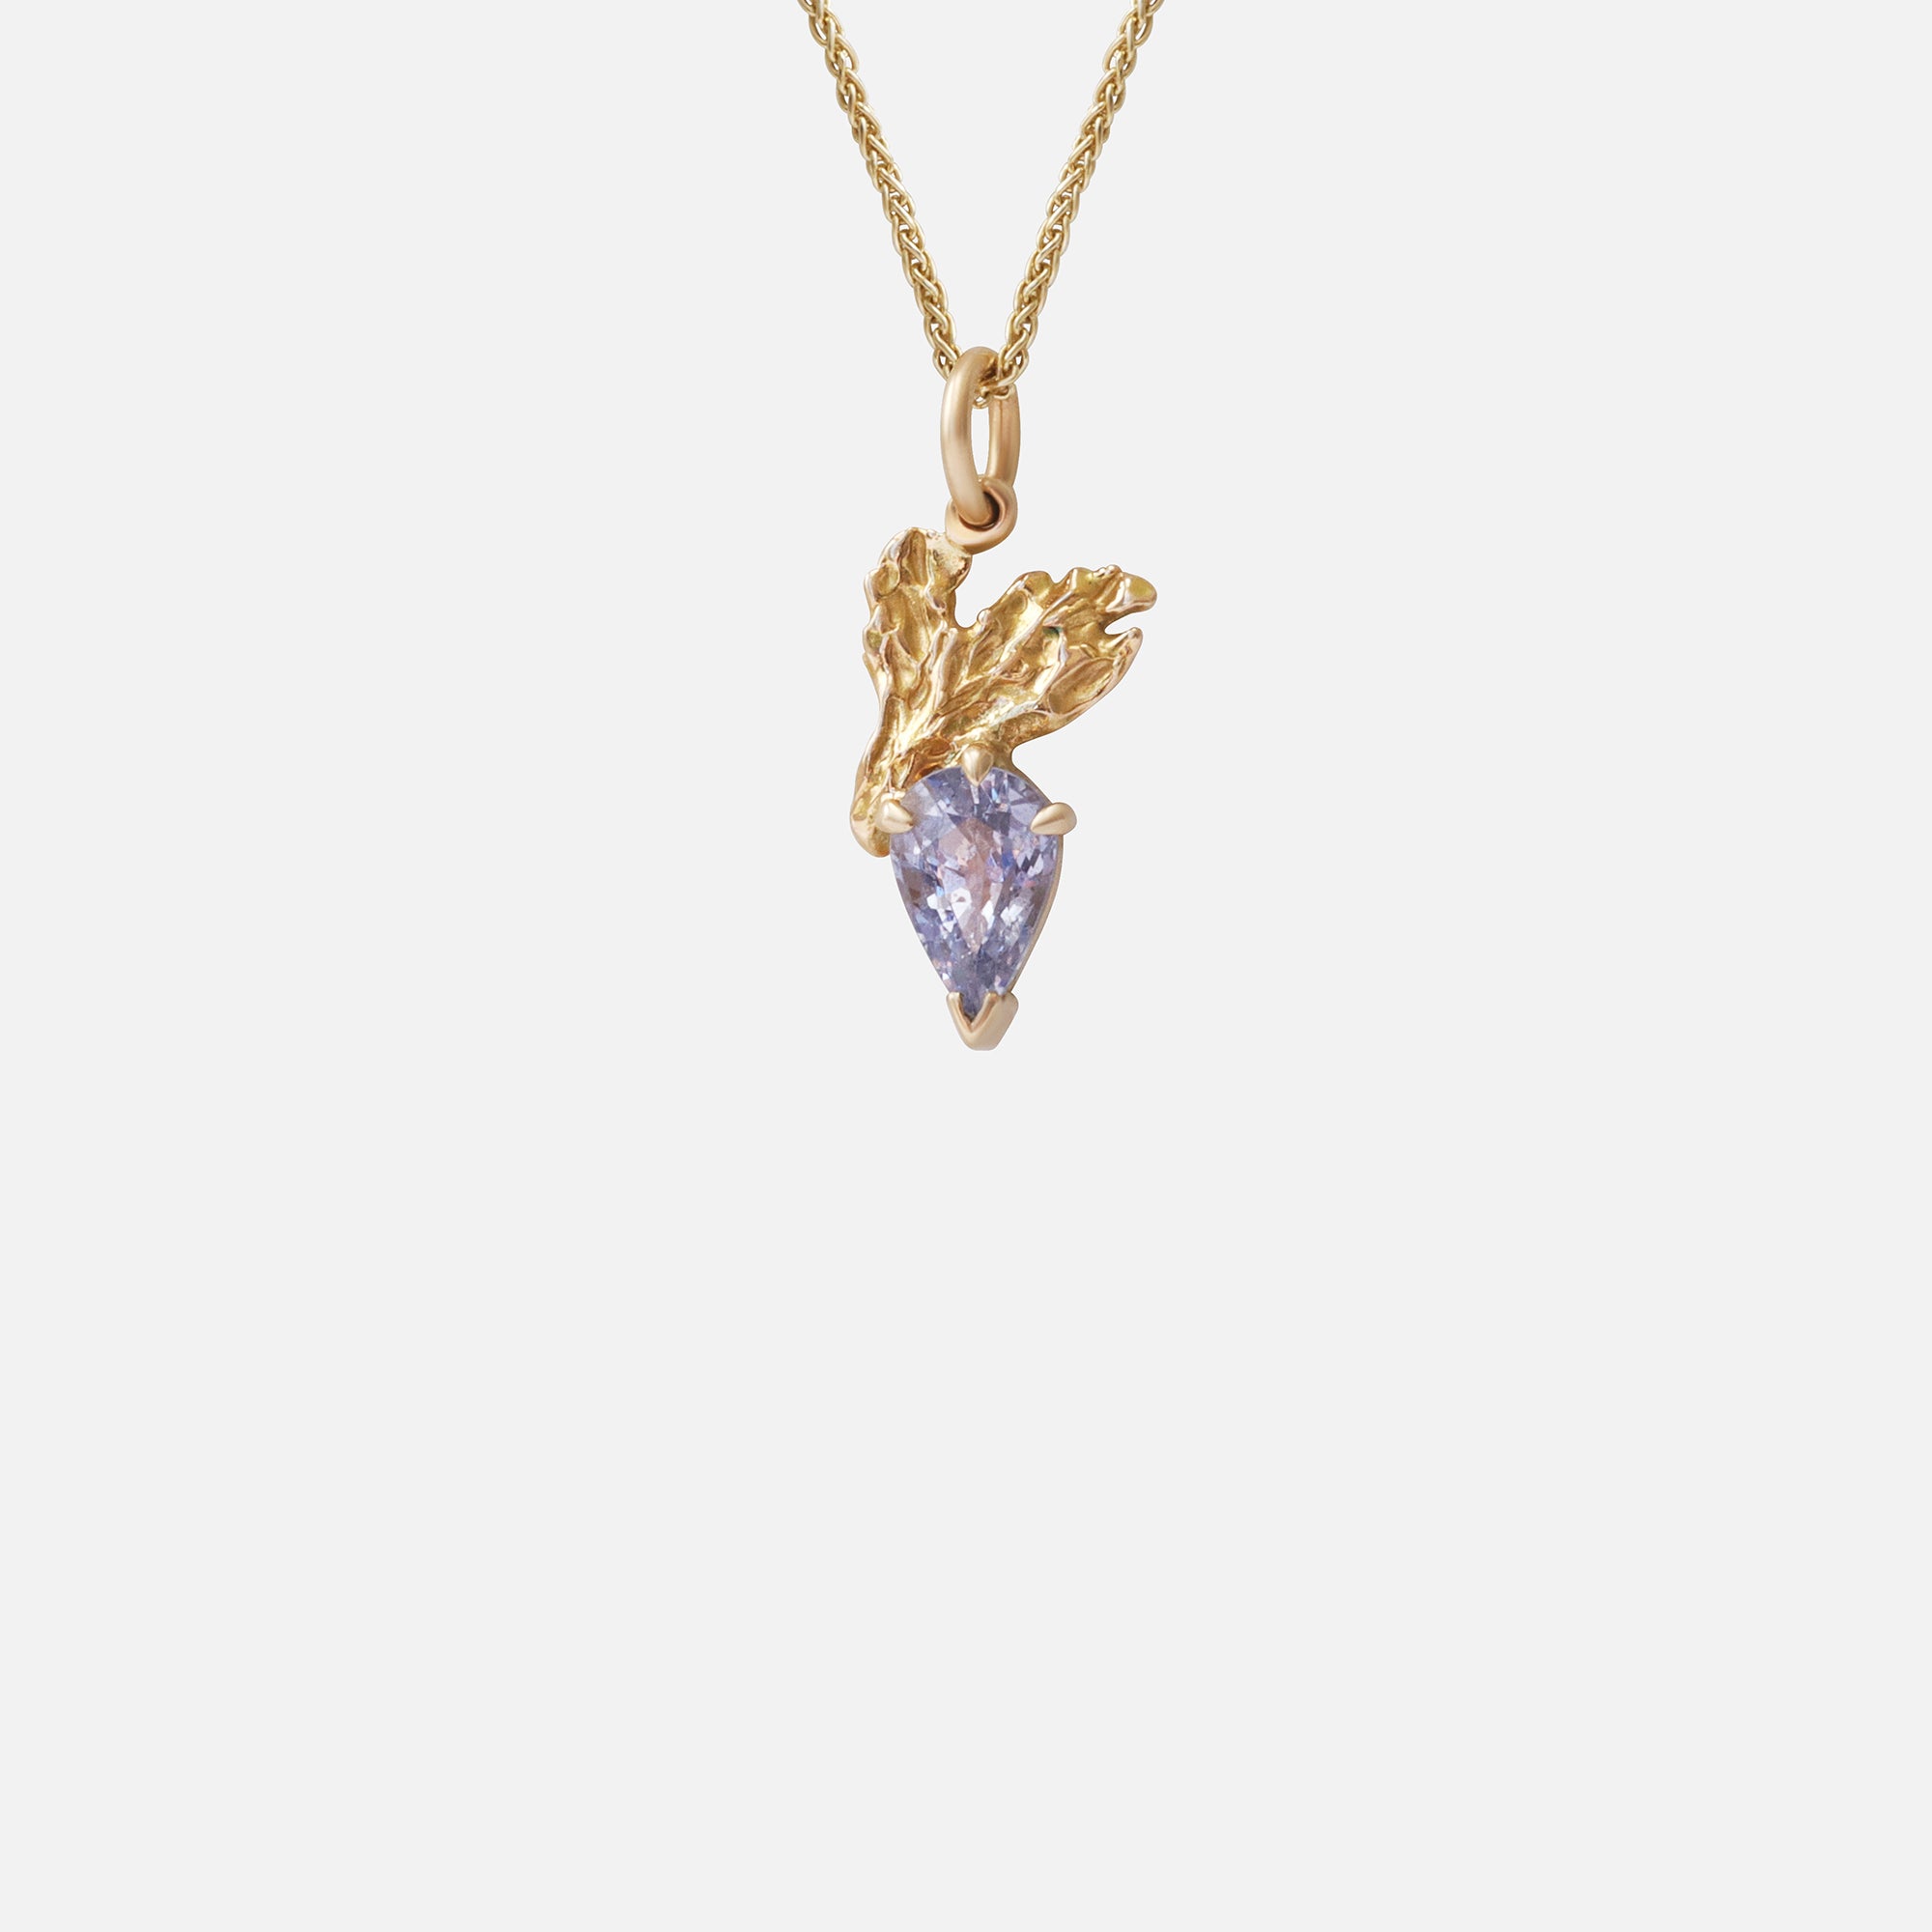 Water's Edge / Sapphire Pendant By O Channell Designs